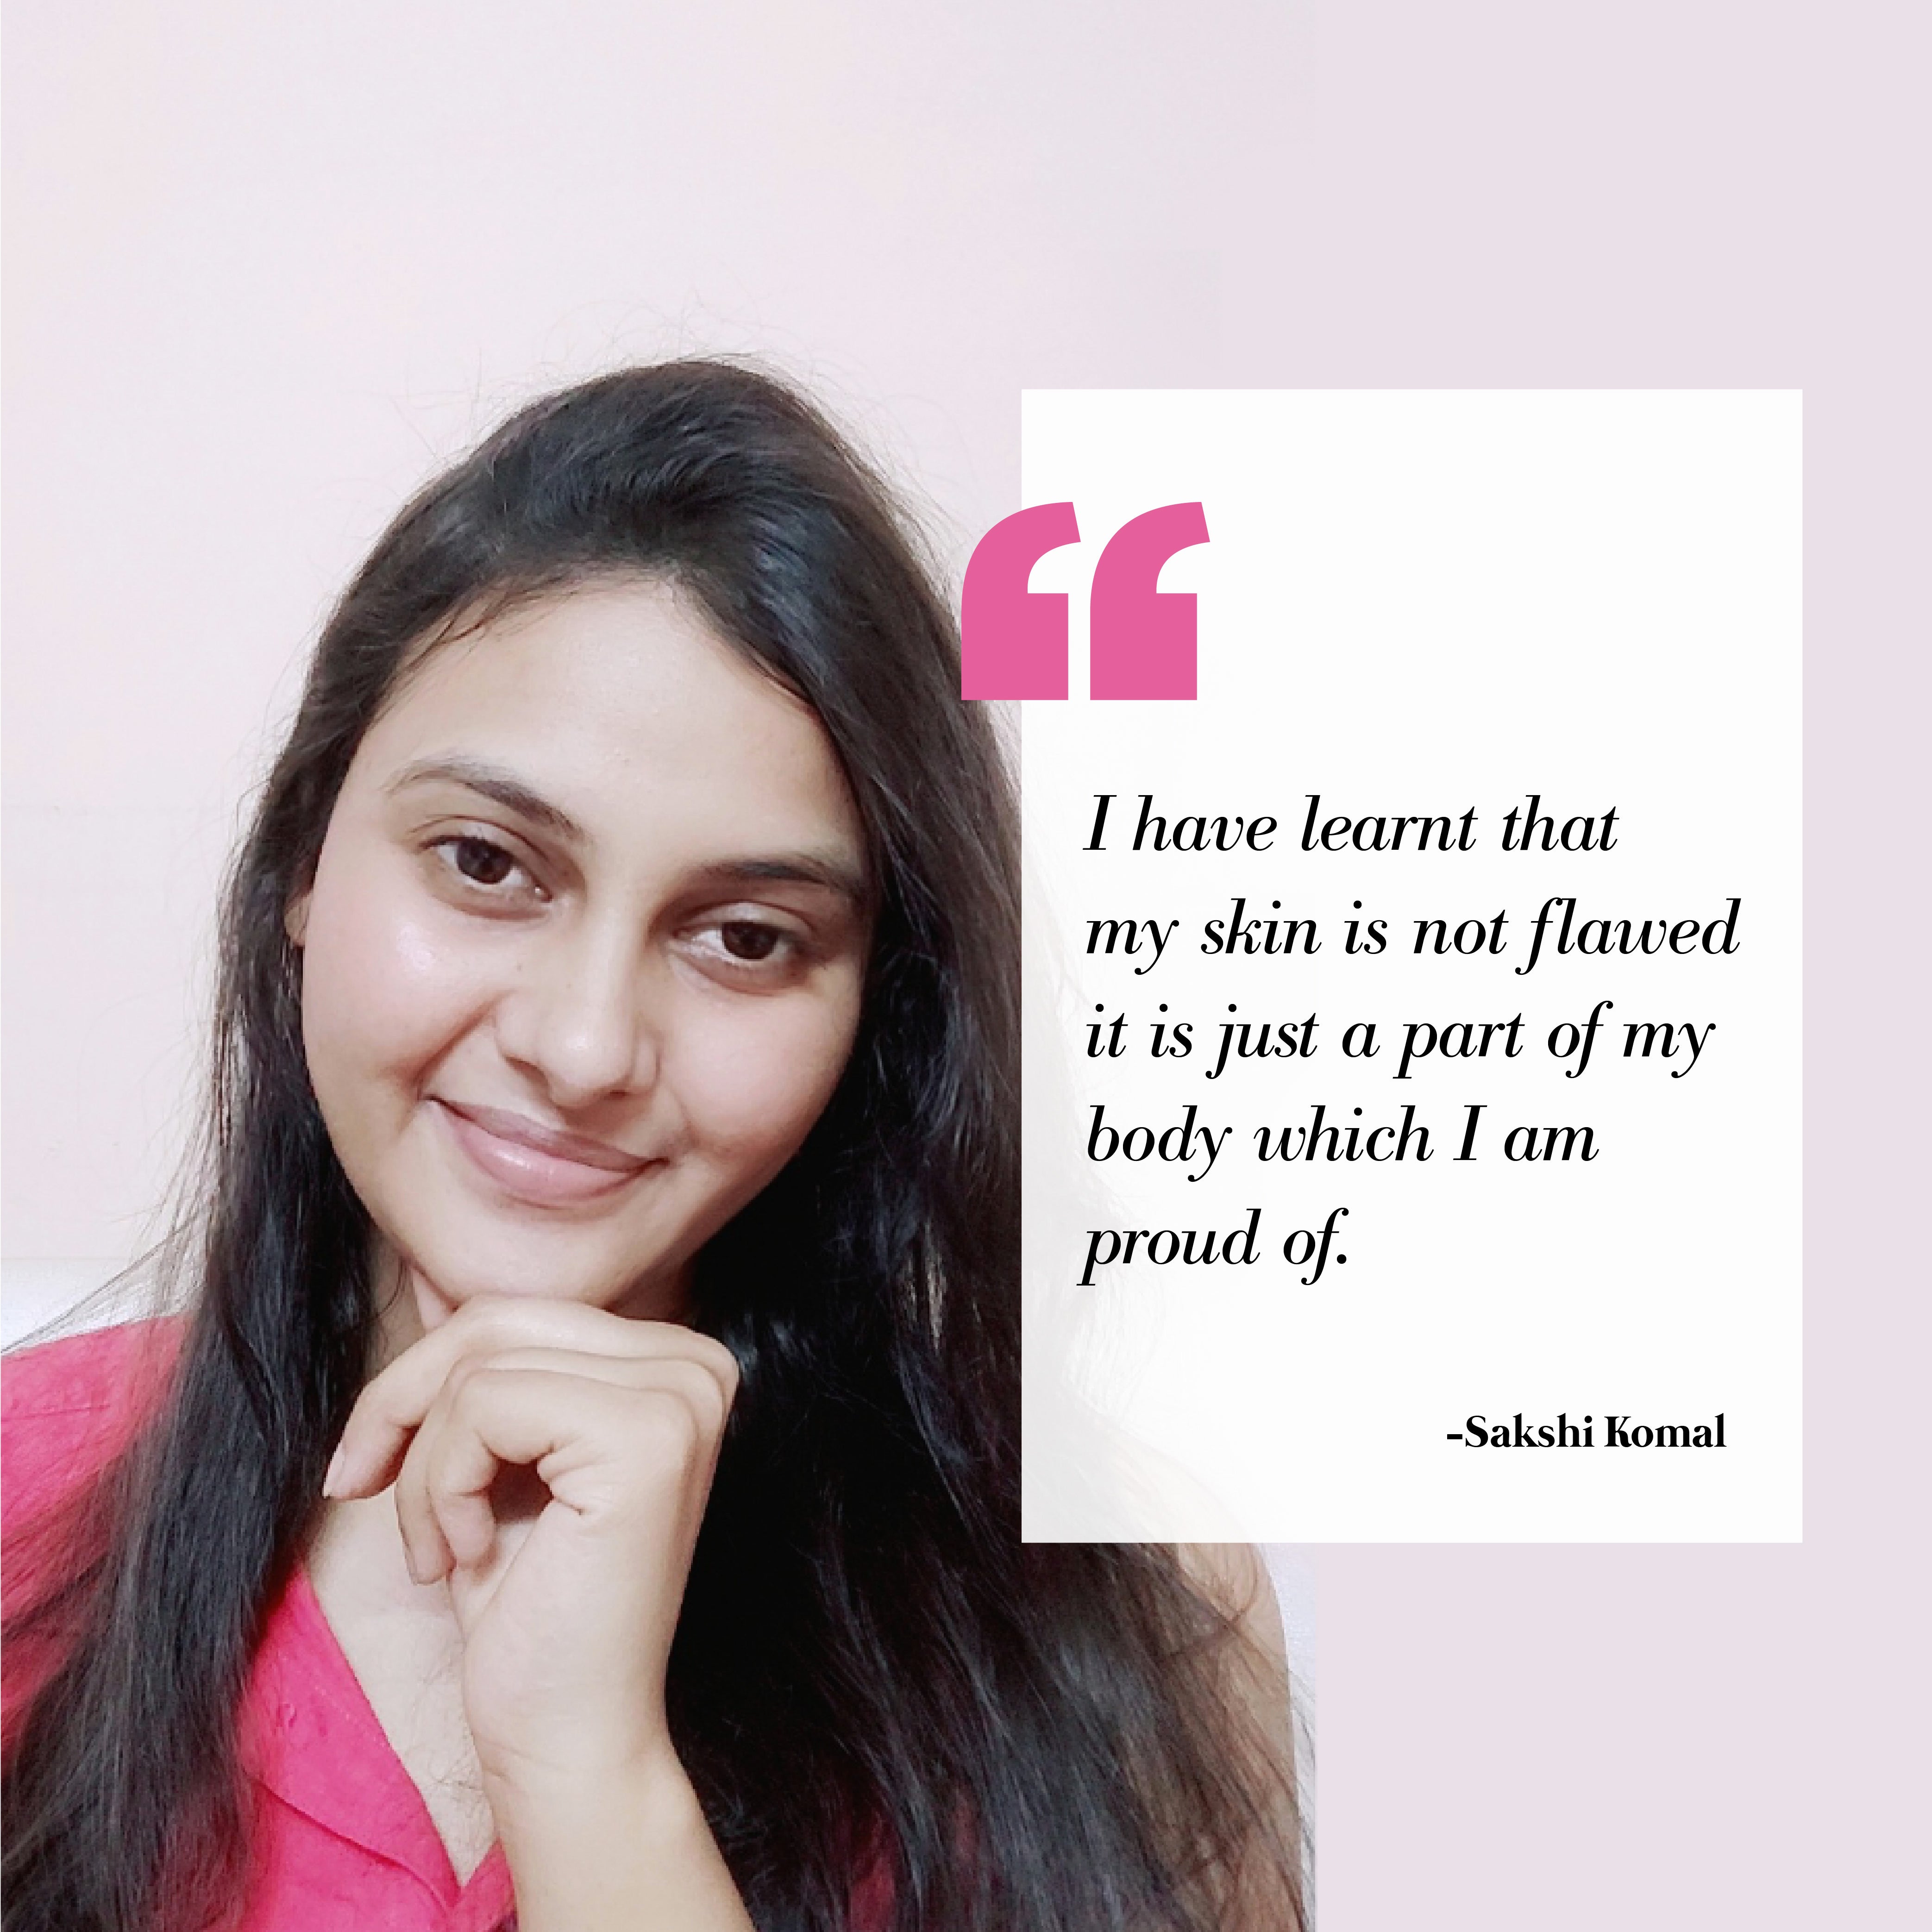 This is an image of Sakshi for a blog on acne and mental health on www.sublimelife.in 